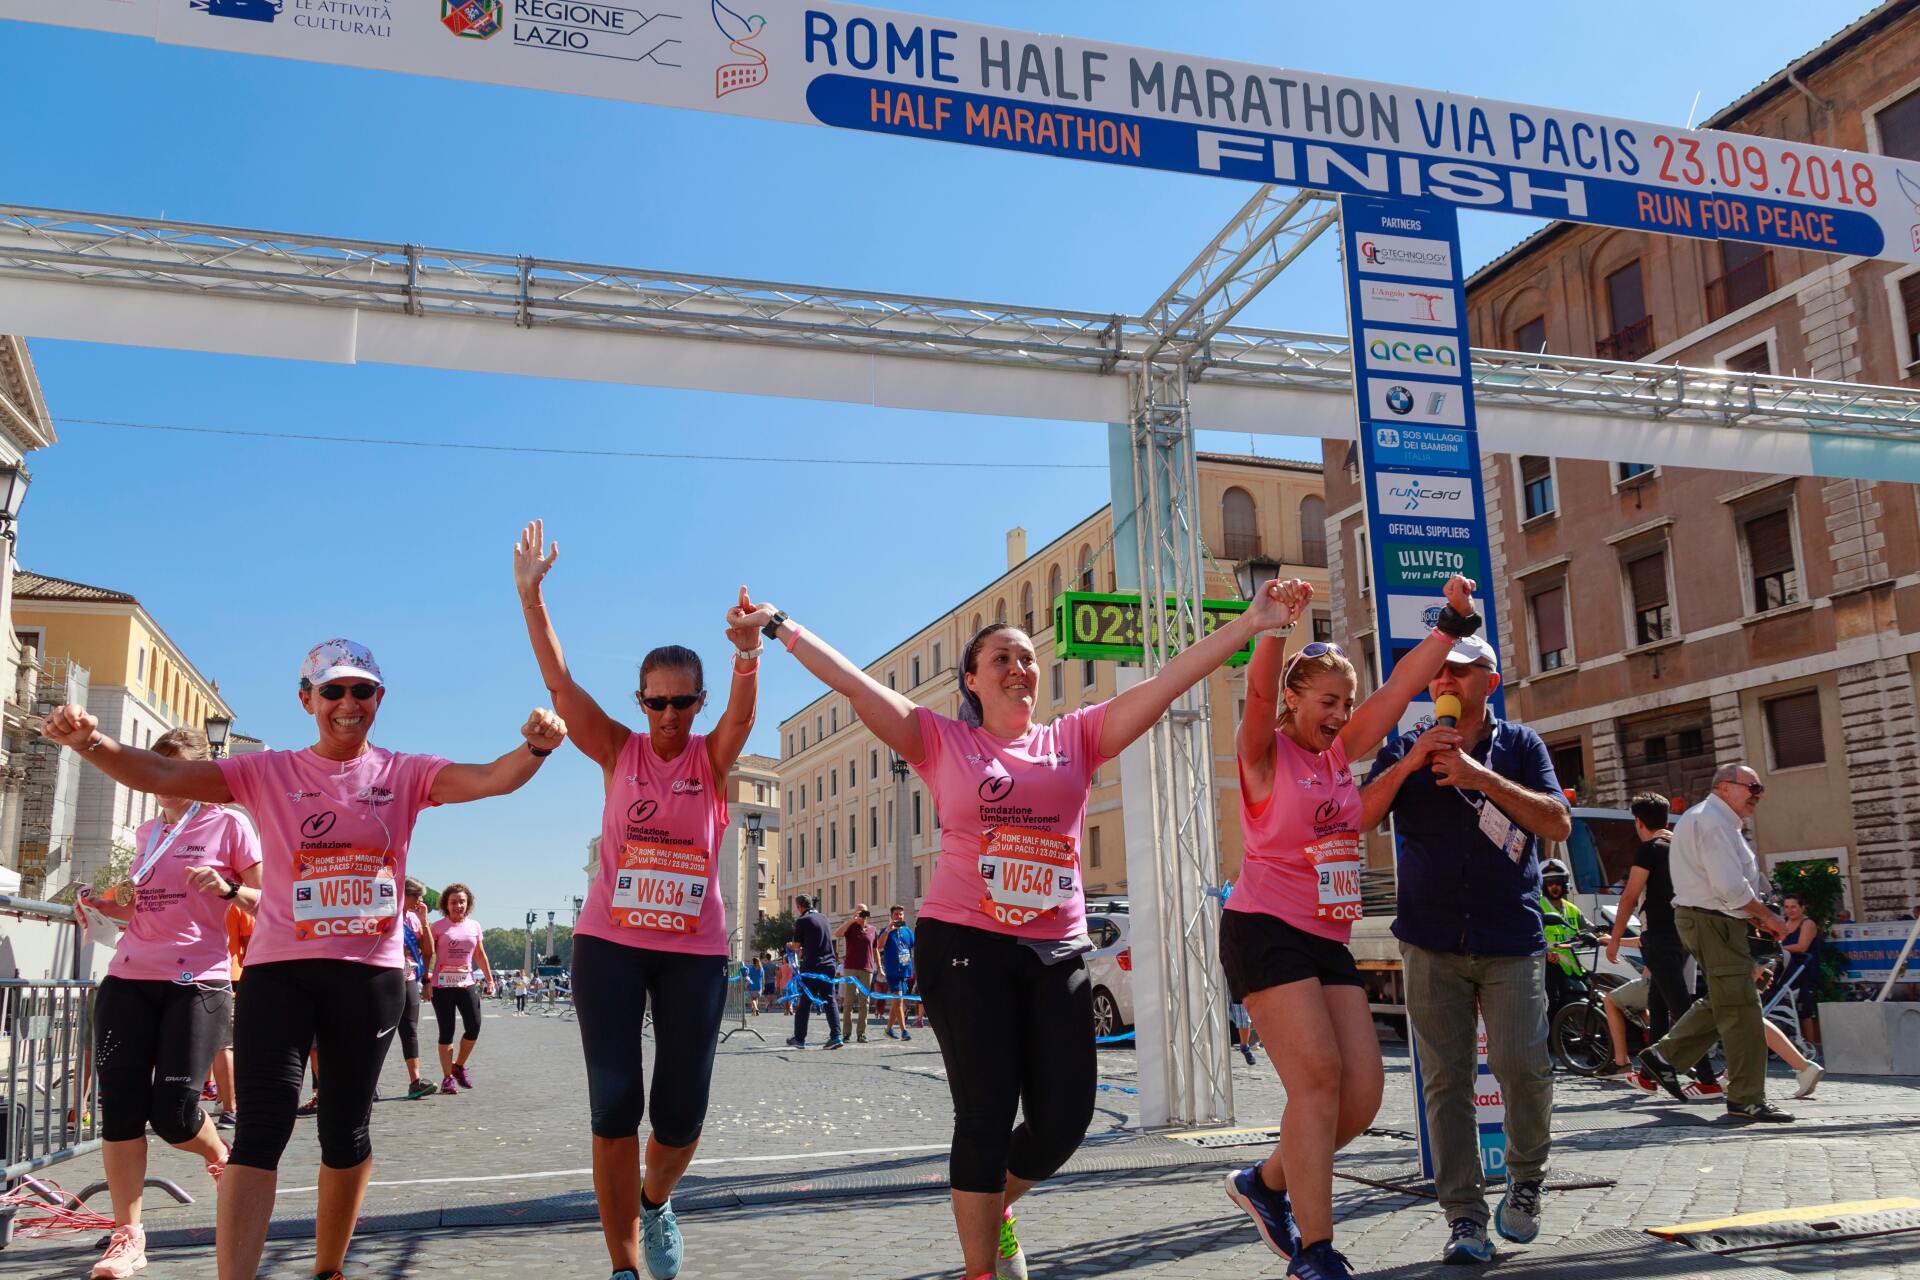 A group of people are running a half marathon in rome